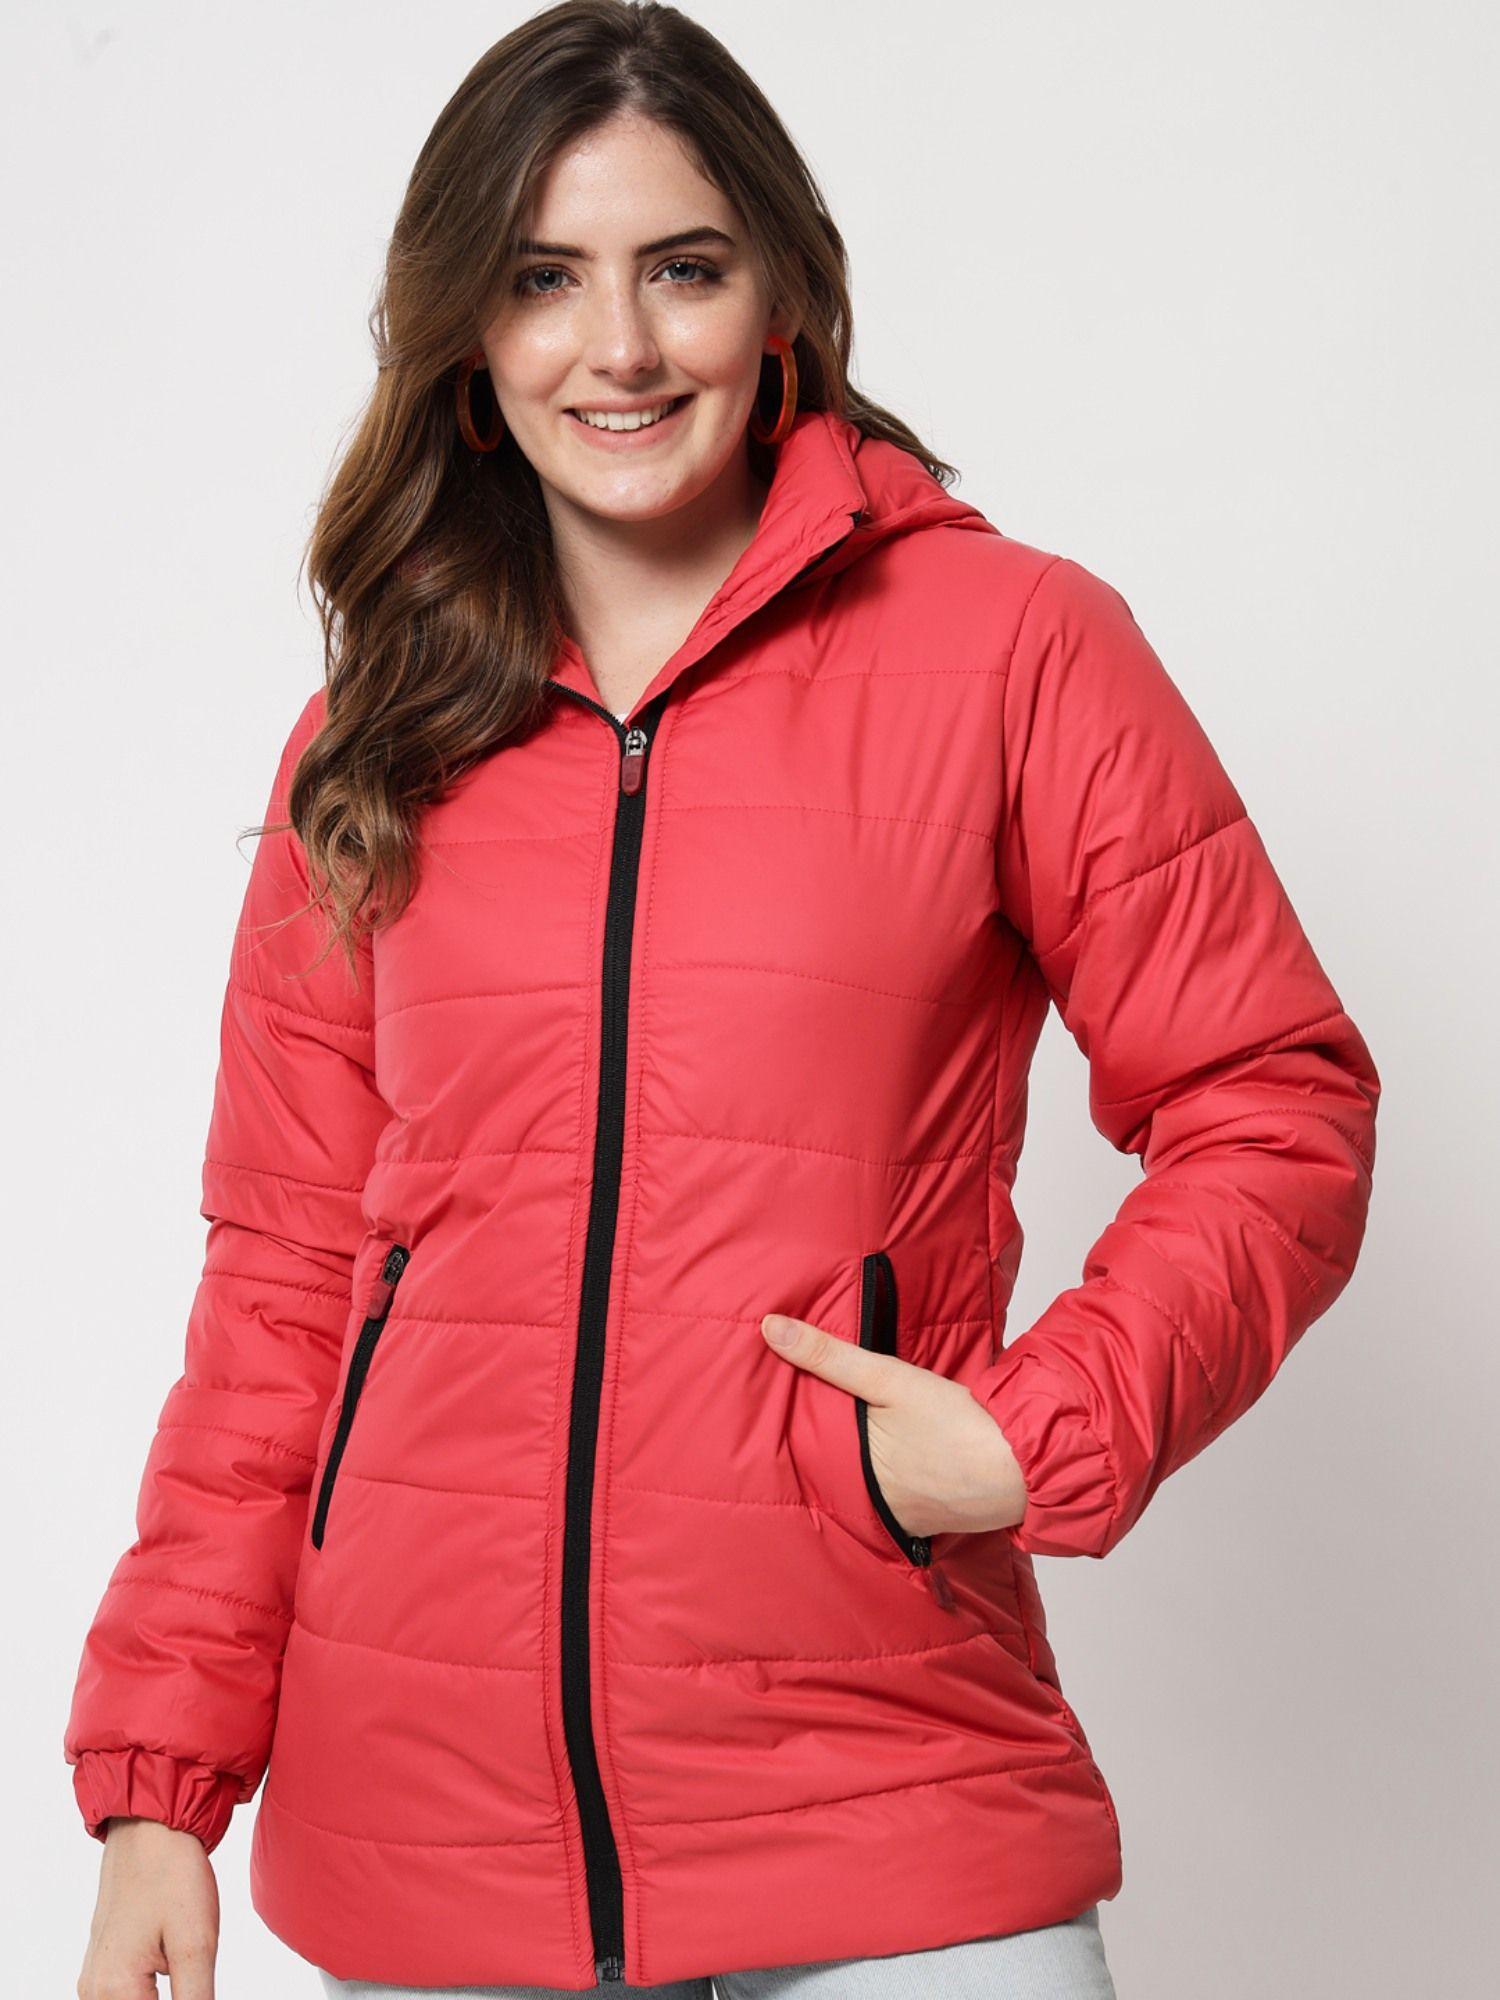 full-sleeve-solid-women-red-puffer-jacket